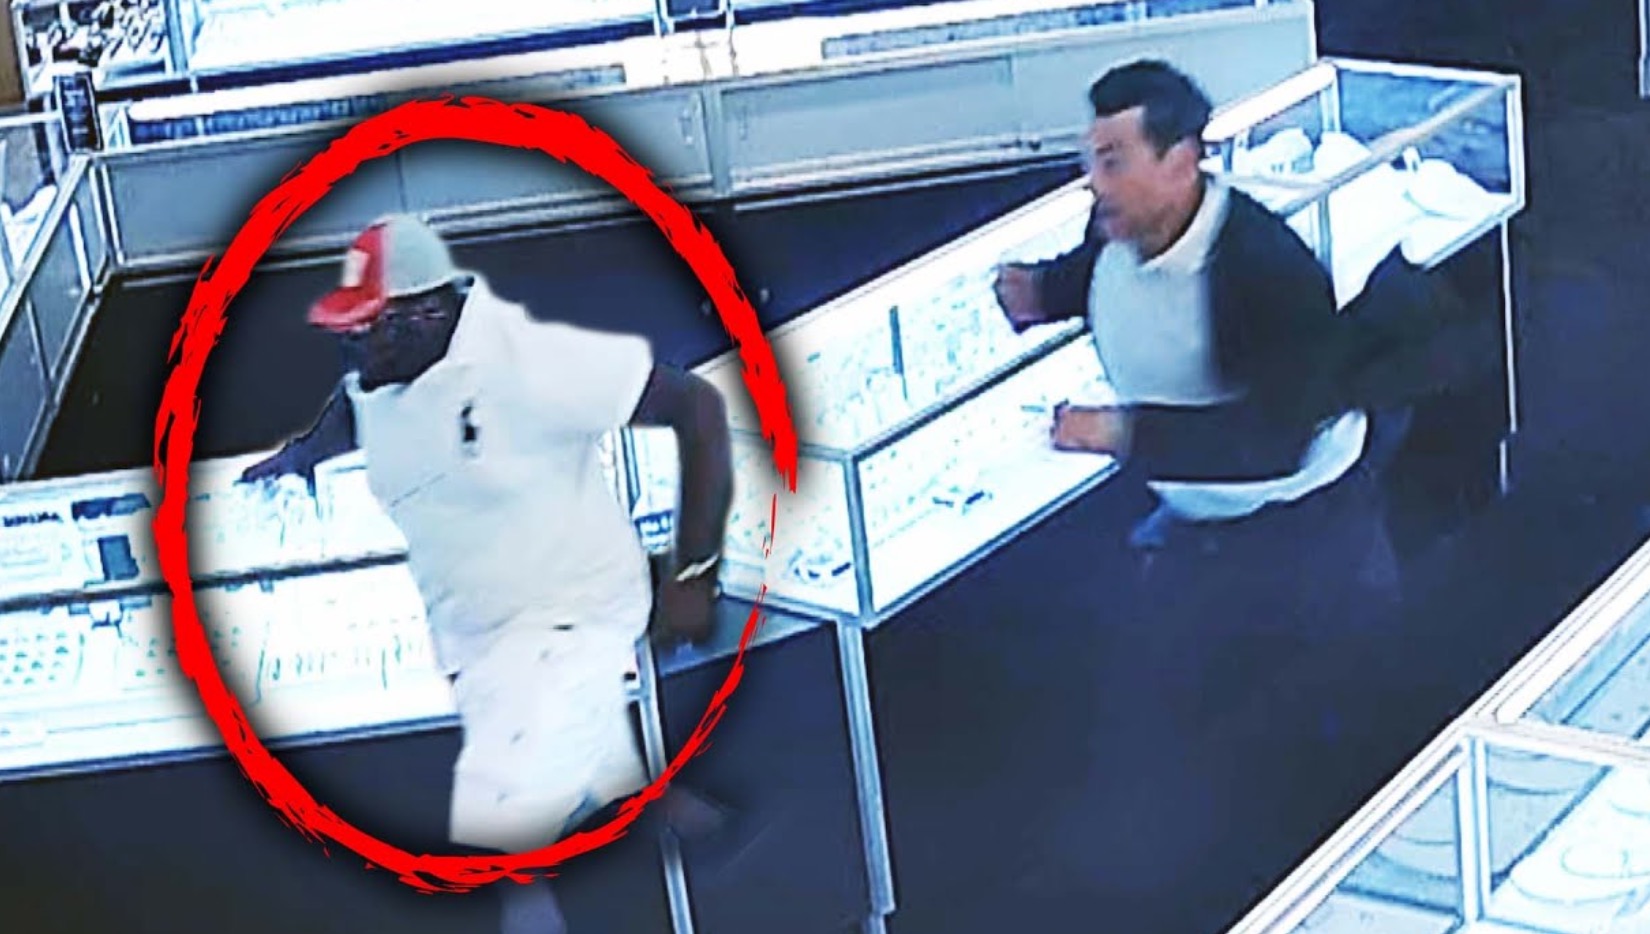 Man Chased Breathelessly by Jewelry Store Owner After He Took Off With Gold Chain - Watch Video